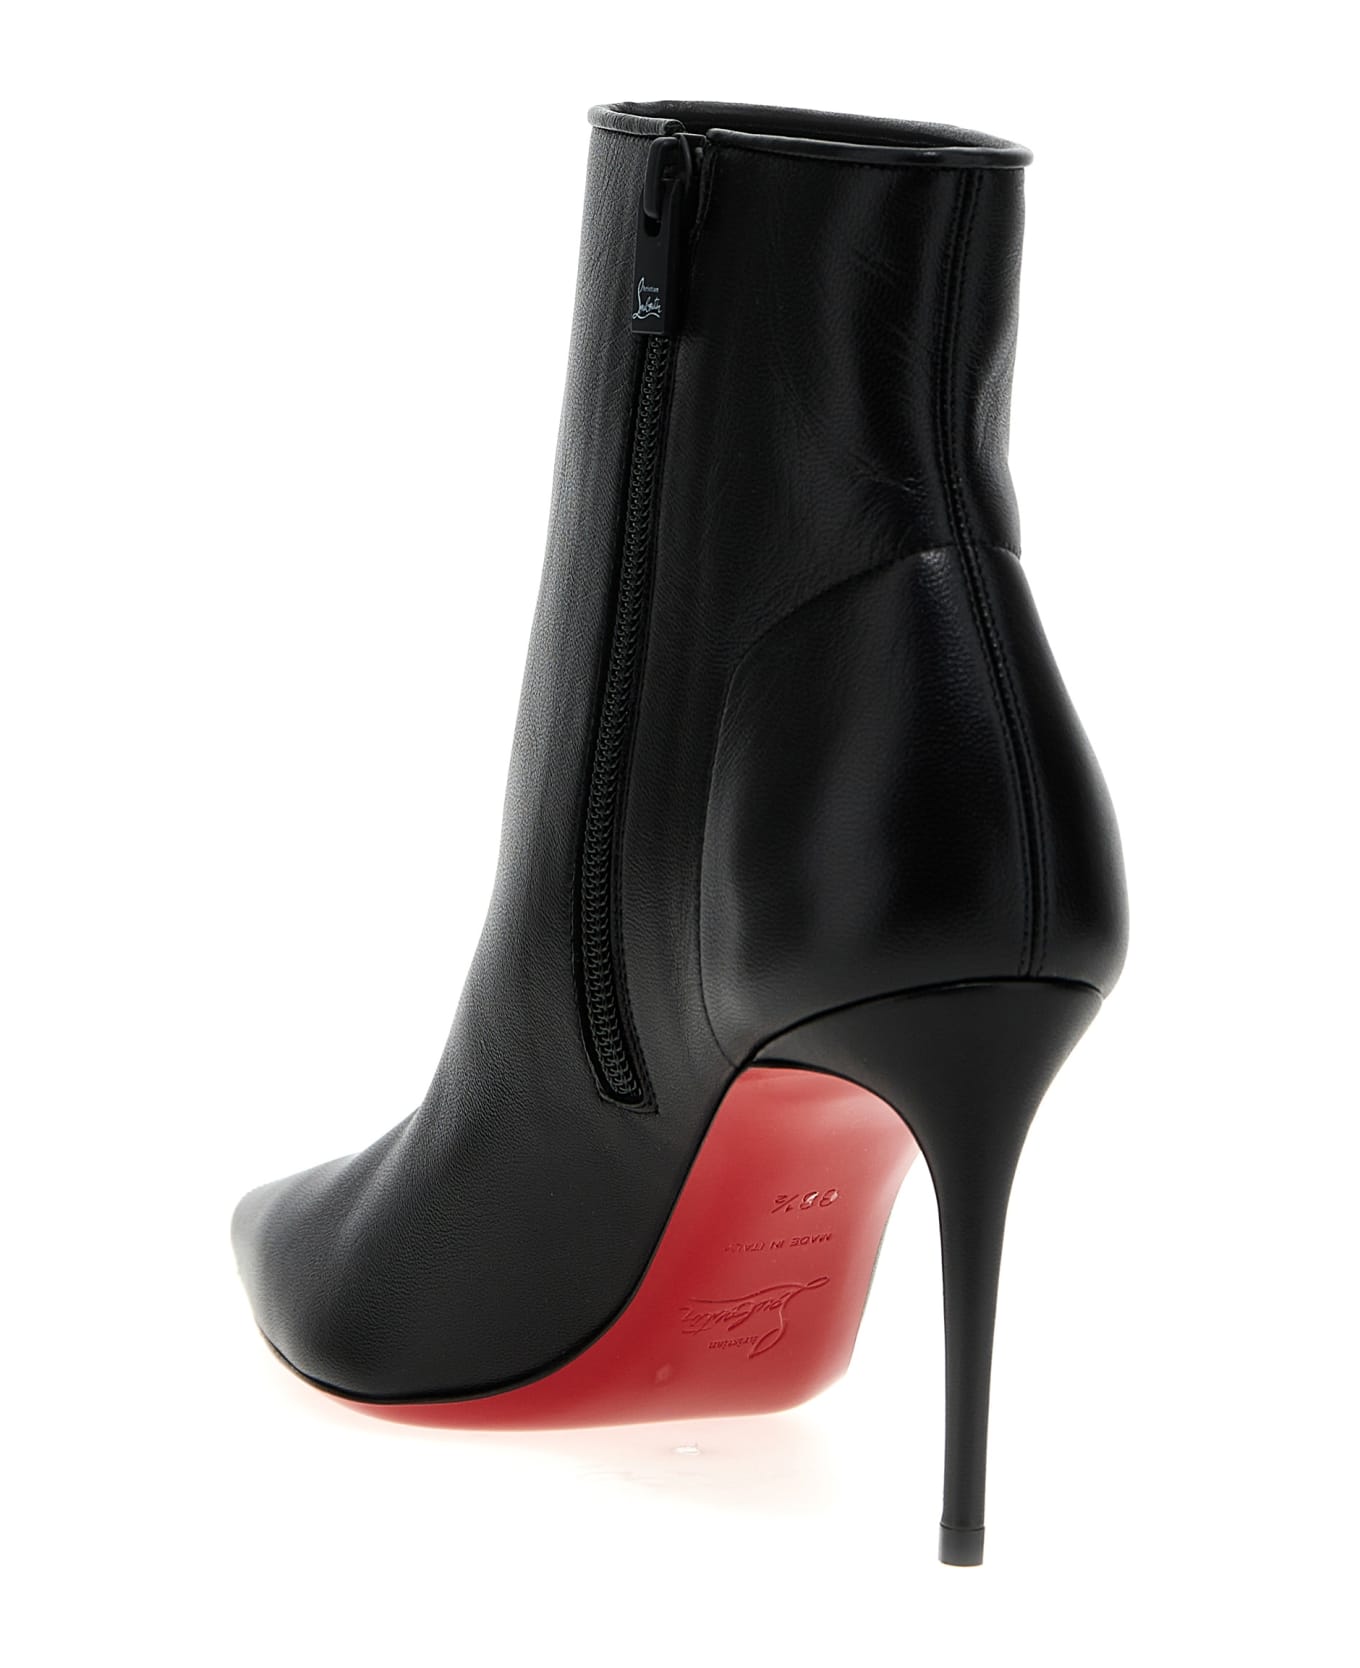 Christian Louboutin 'sporty Kate' Ankle Boots - Black   ブーツ